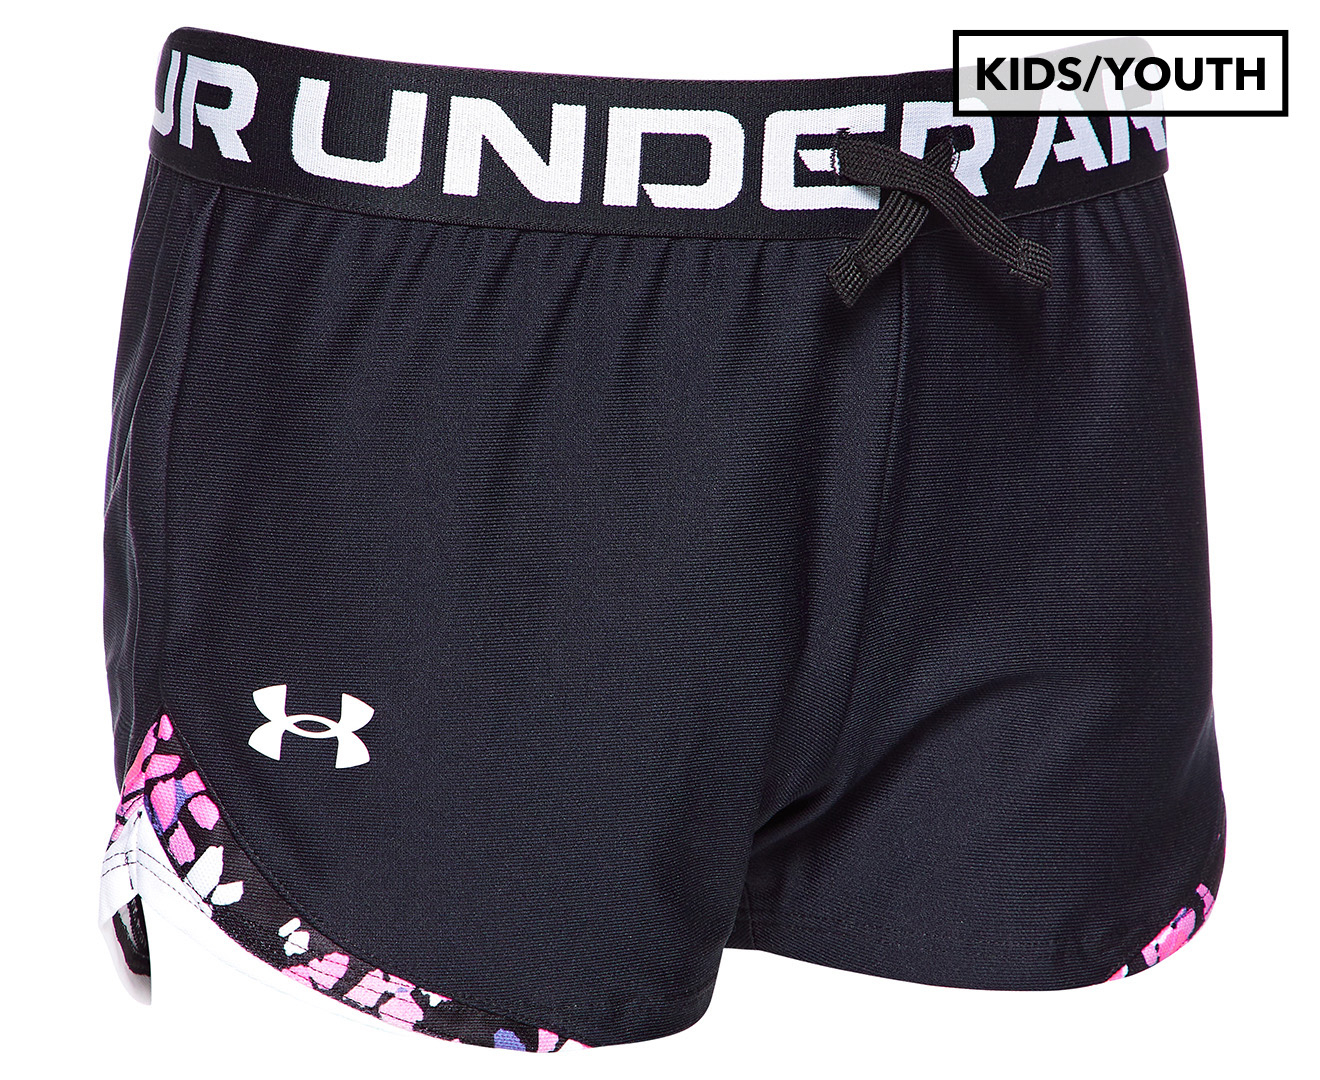 Under Armour Girls' Play Up Tri-Colour Shorts - Black/White